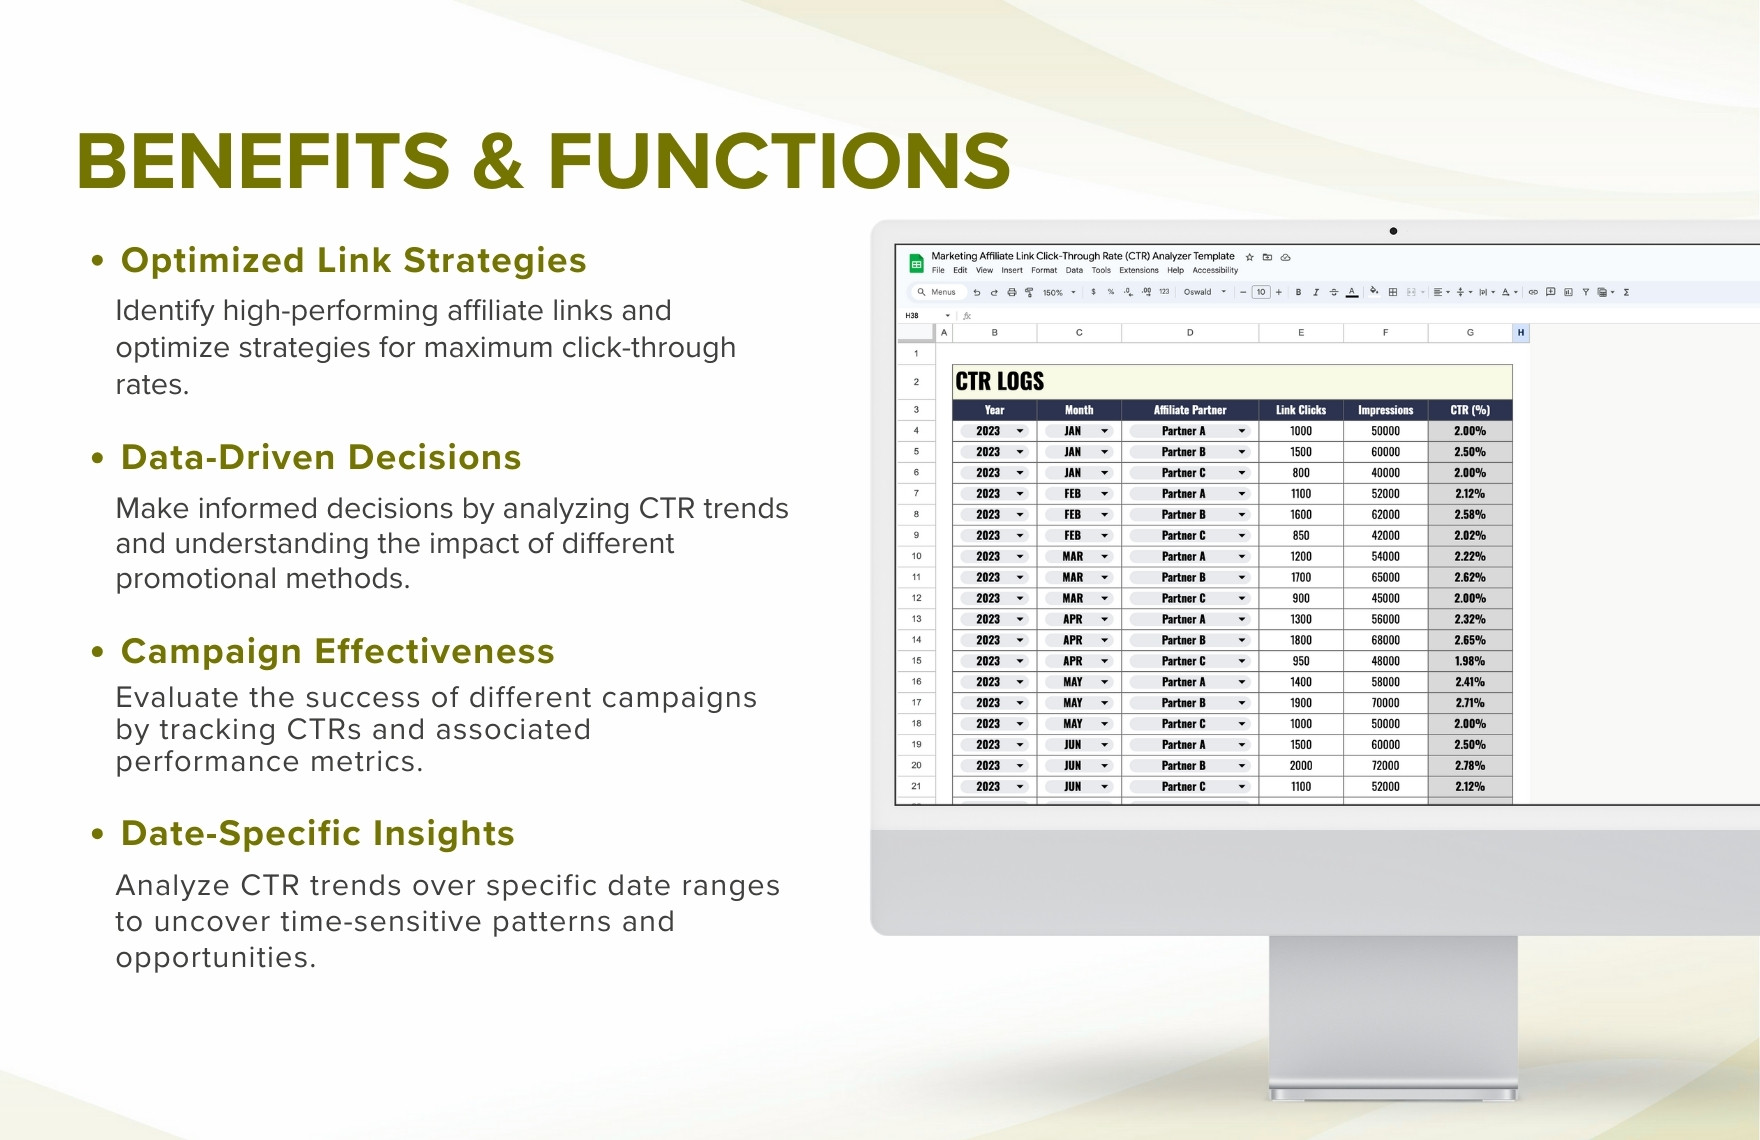 Marketing Affiliate Link Click-Through Rate (CTR) Analyzer Template